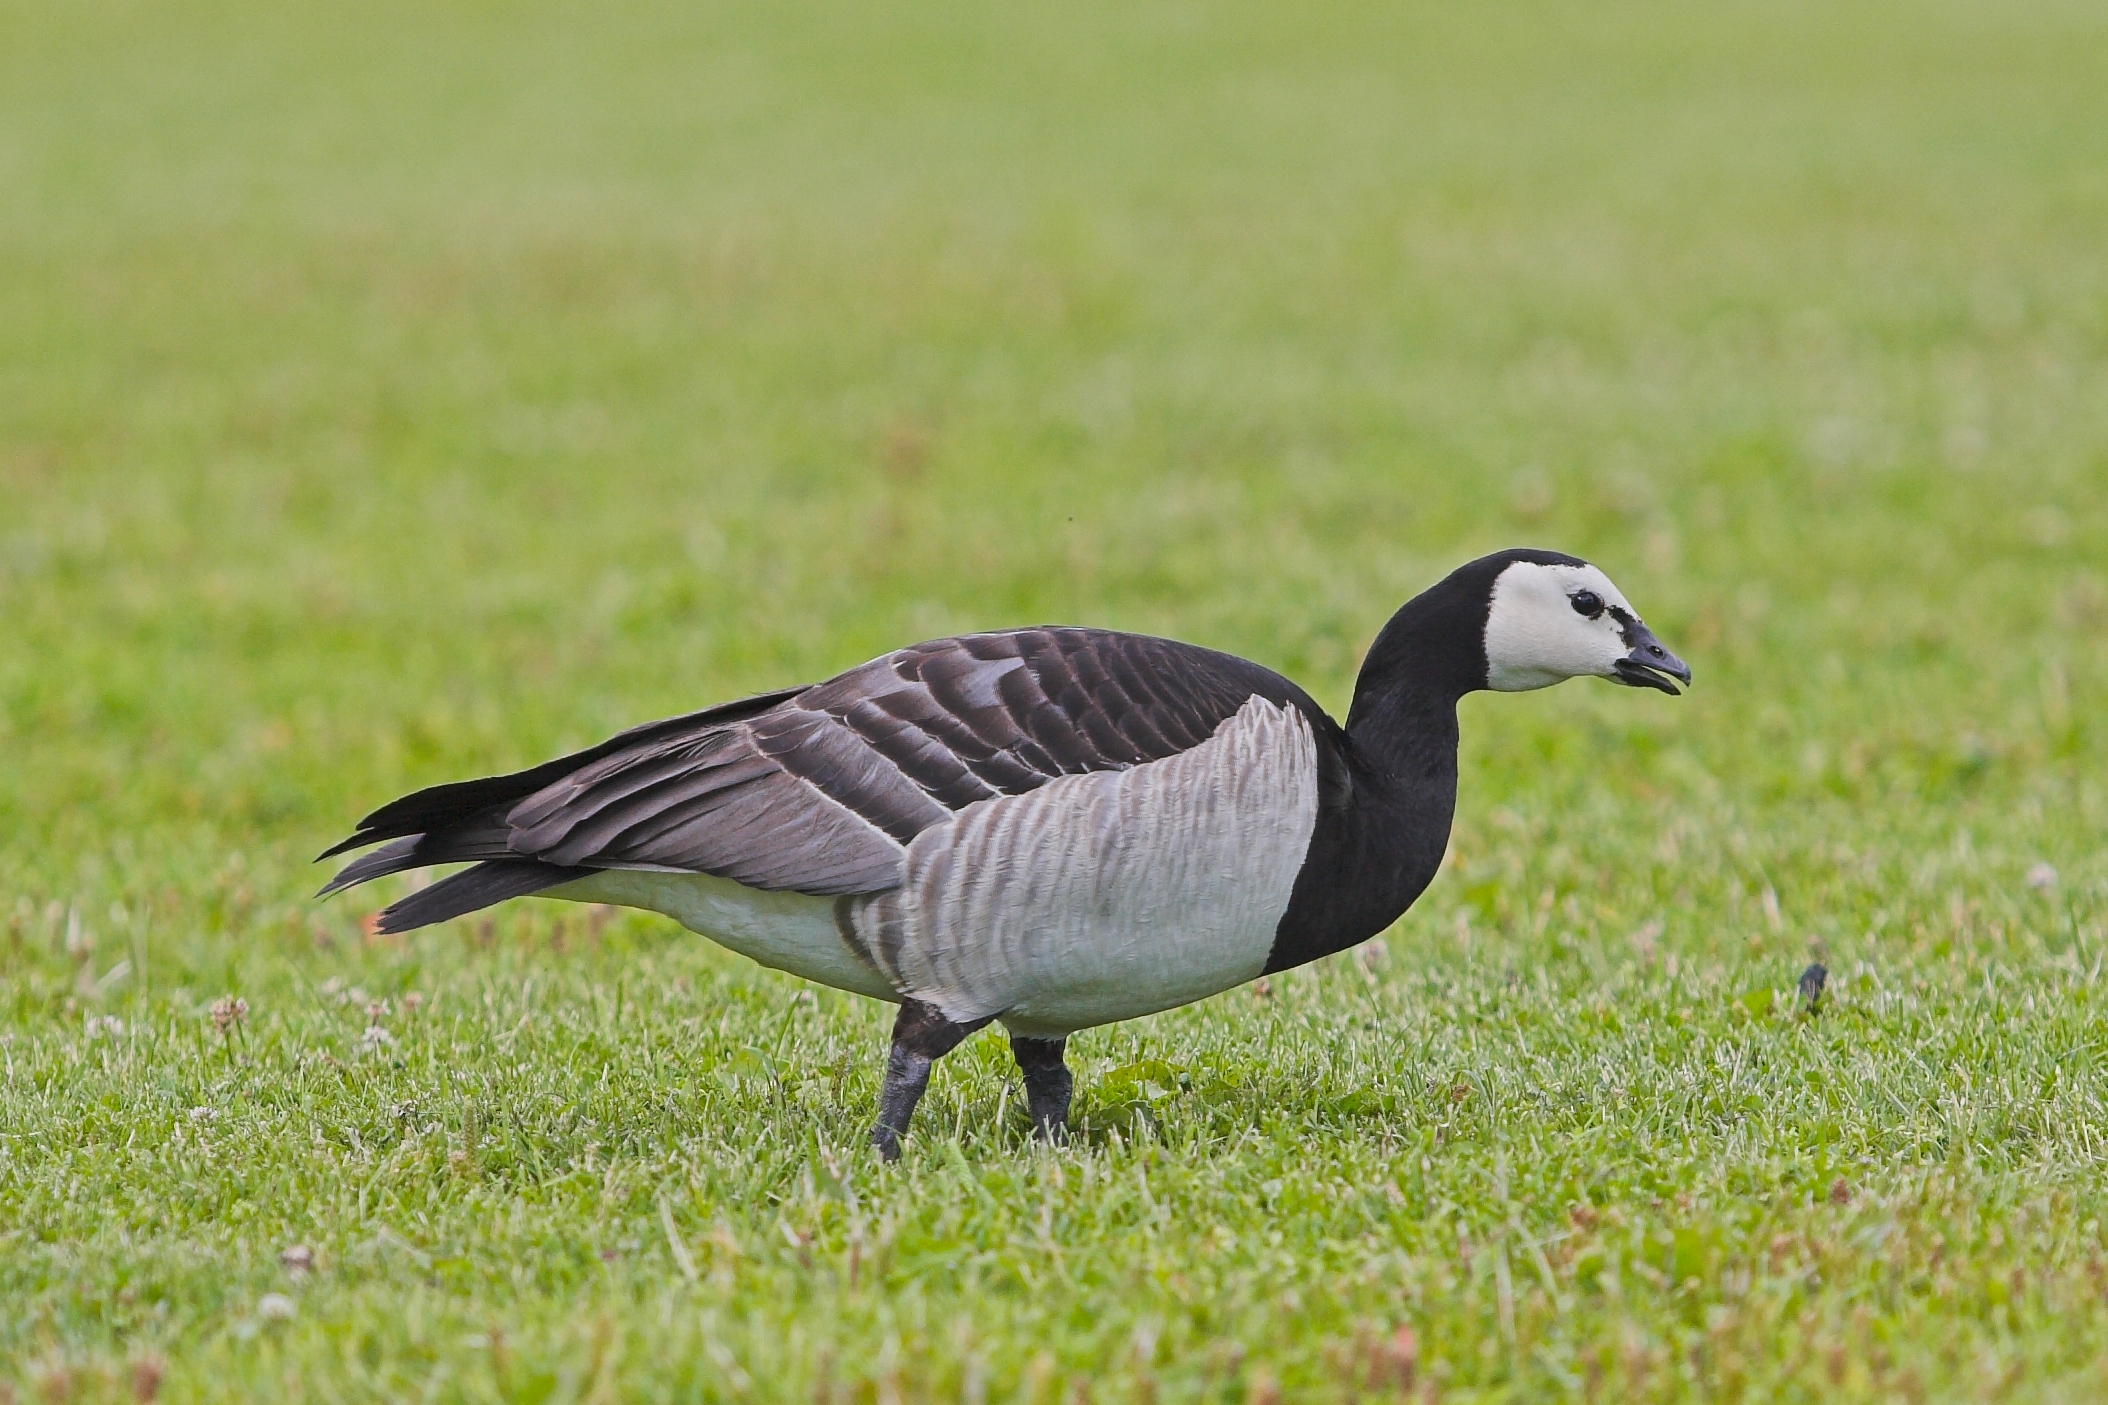 Barnacle Goose on the grass